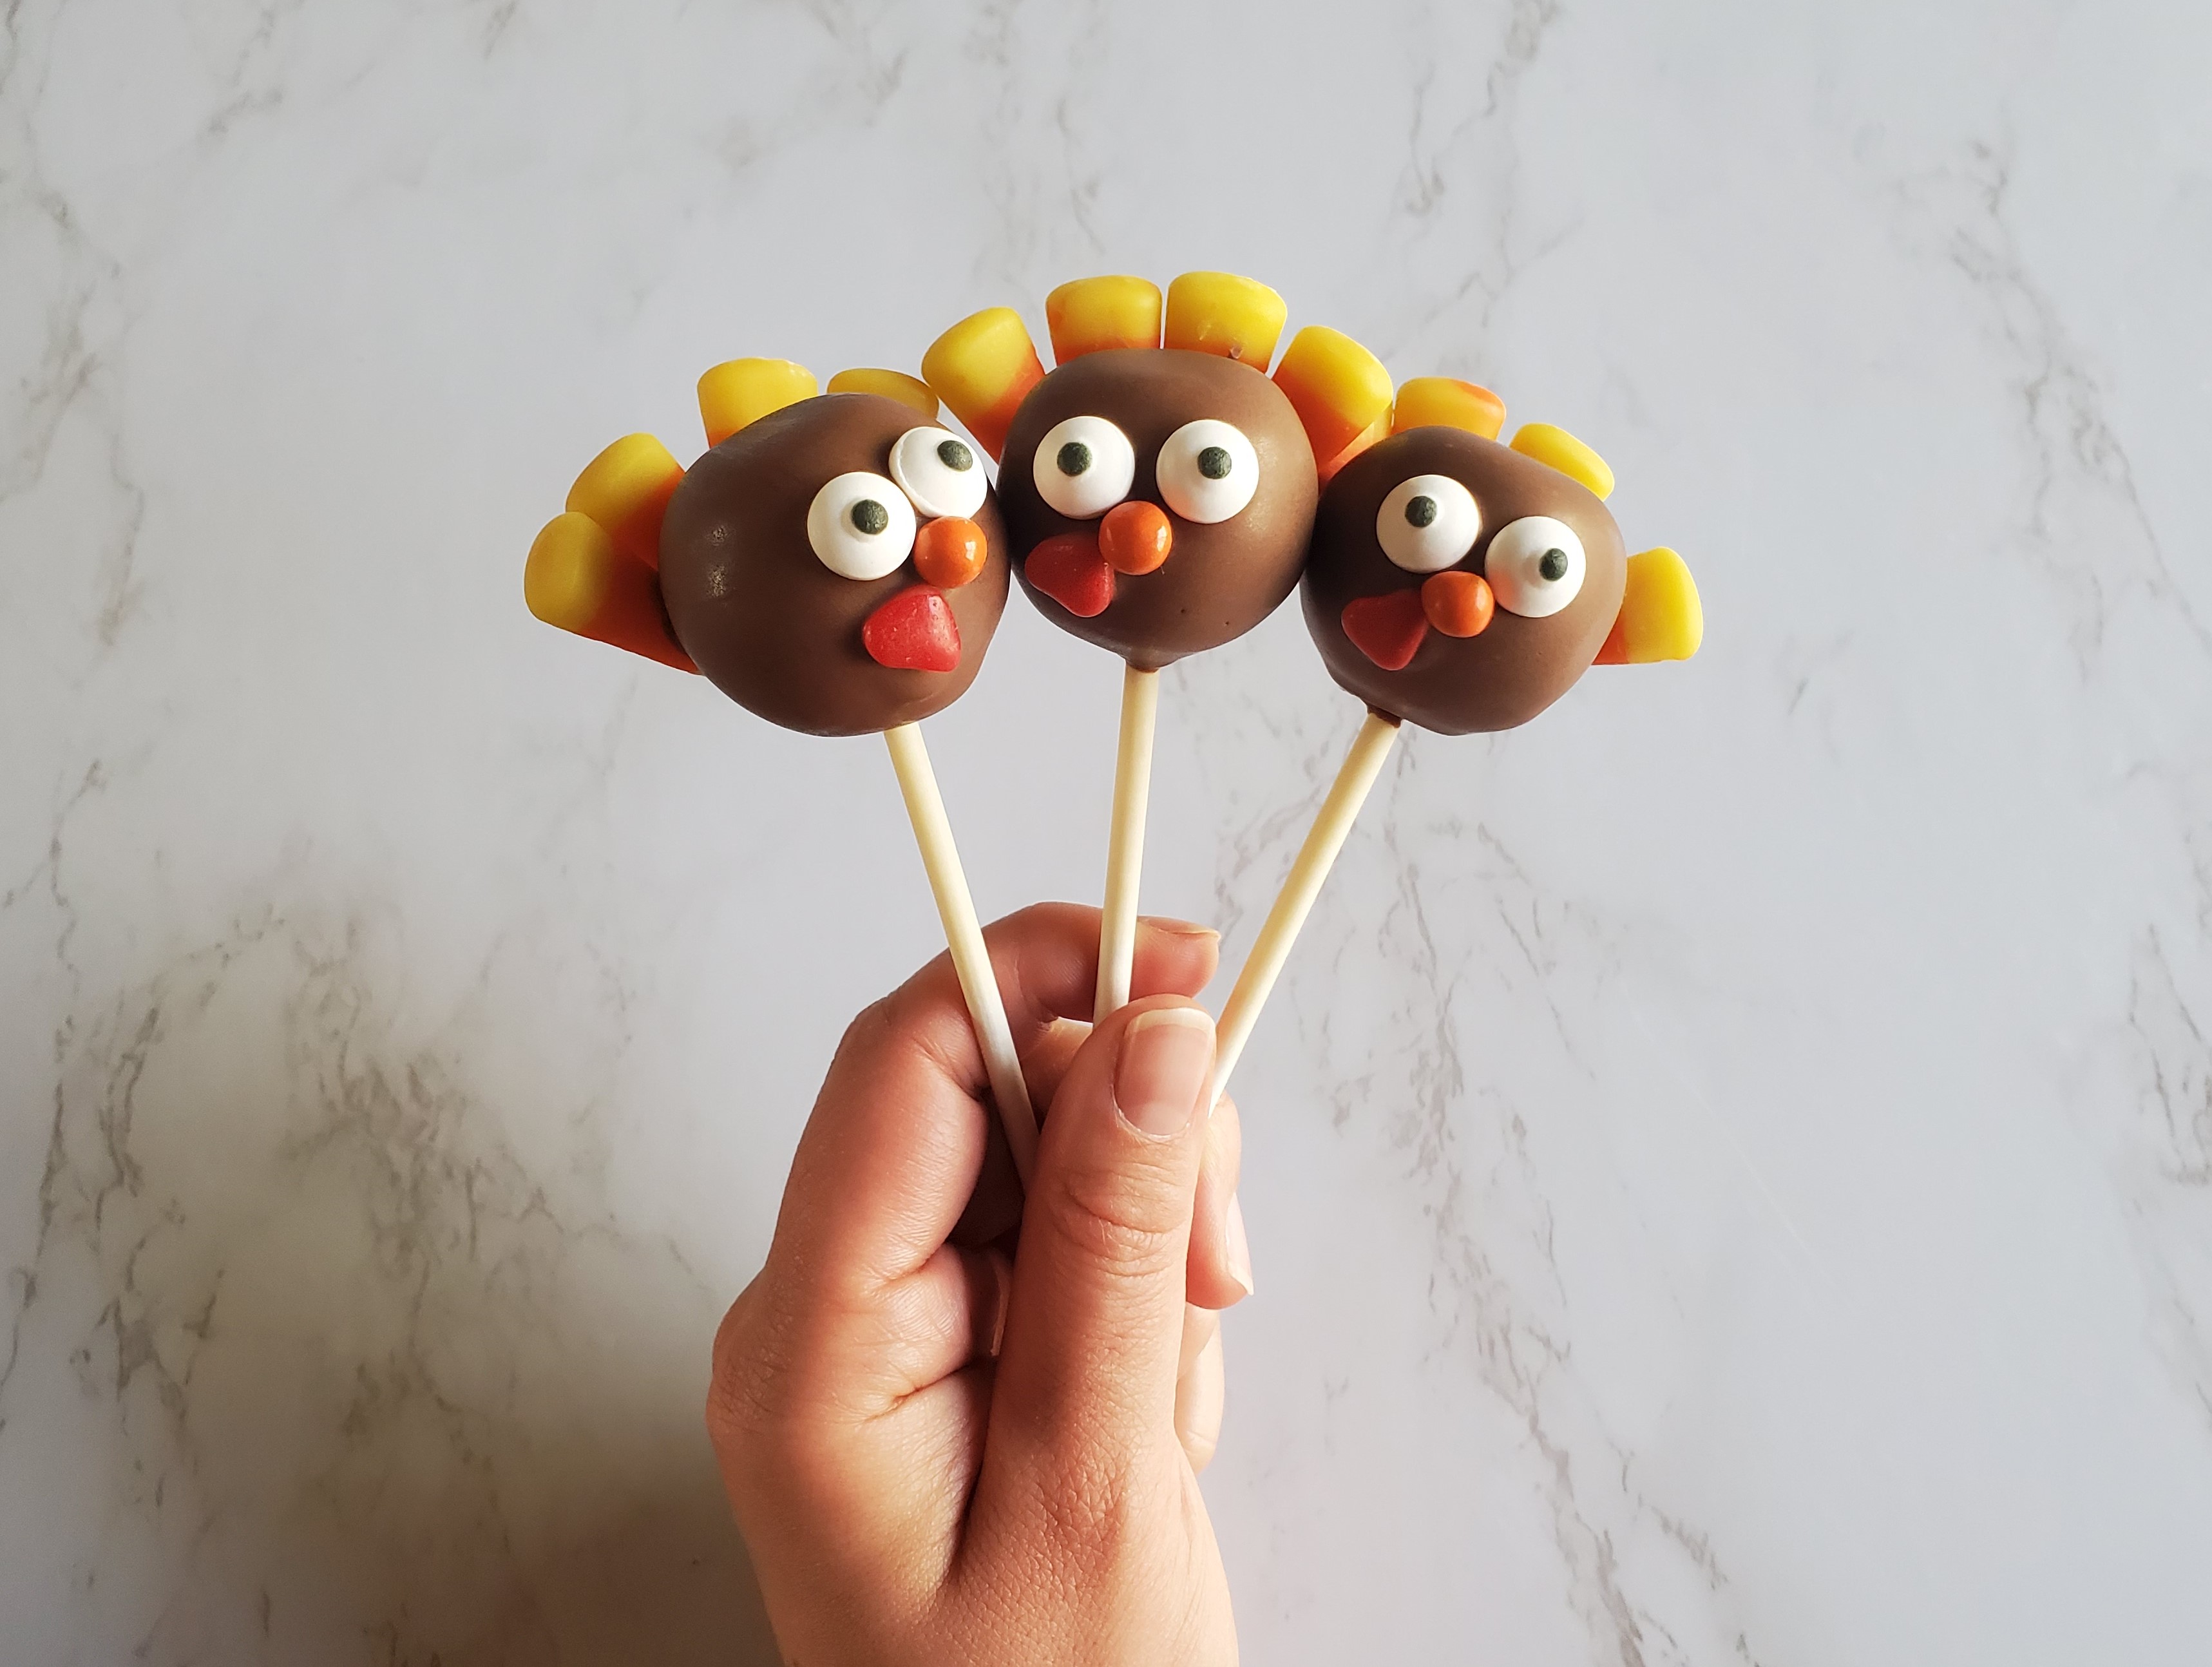 A hand holds up three cake pops decorated with candies including candy corn feathers to looks like turkeys in front of a marble background.